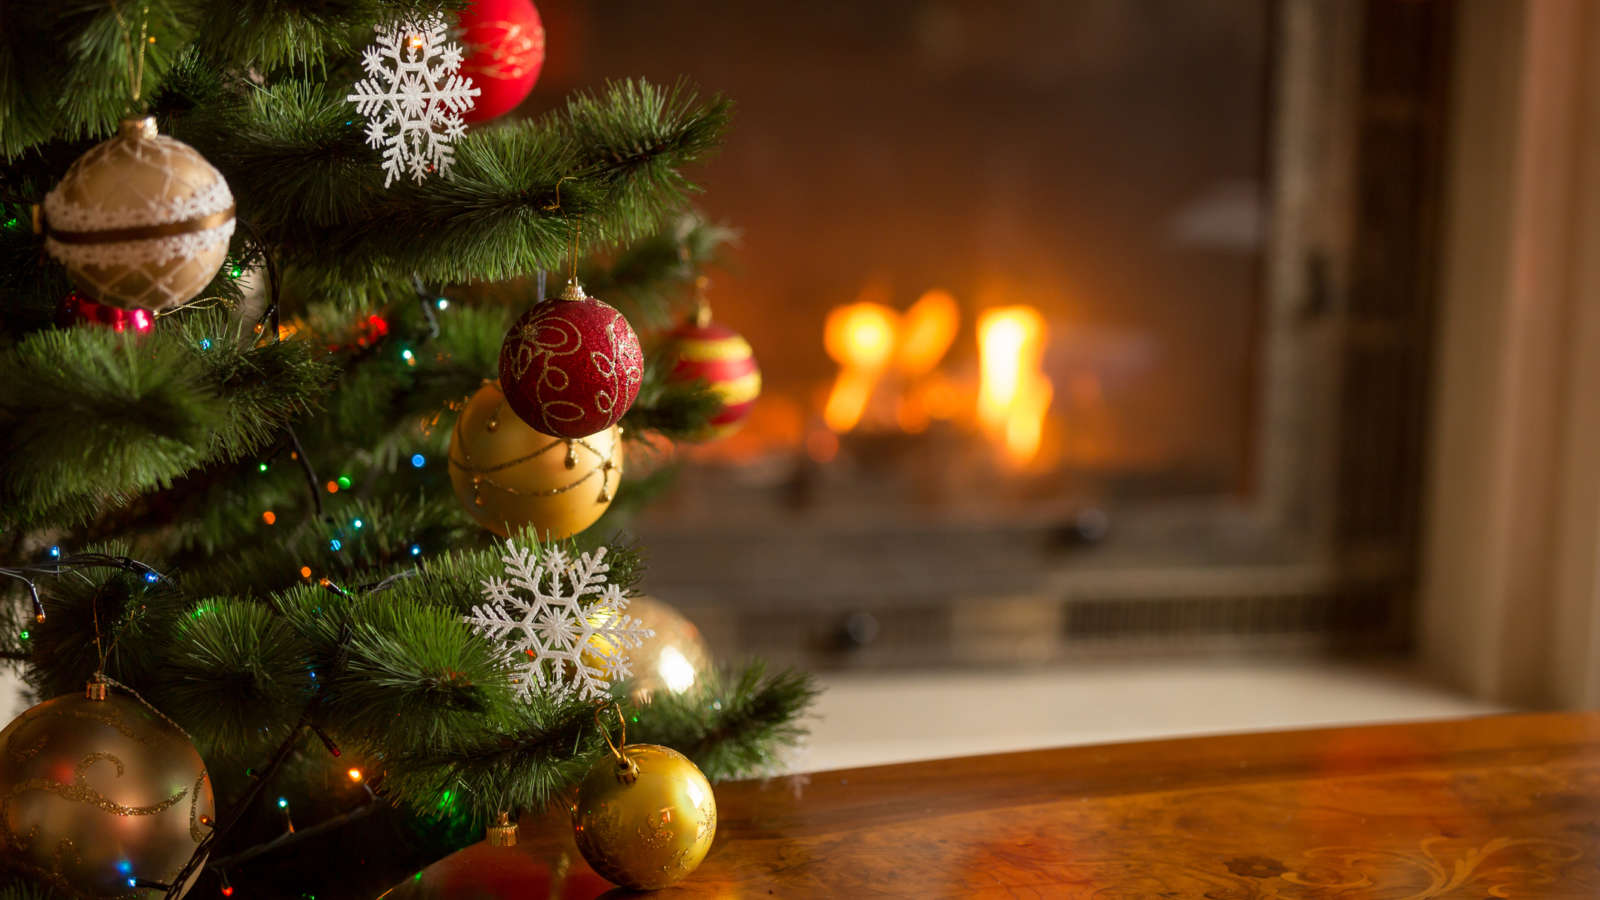 christmas trees and other decorations can hide pests and lead to further infestations